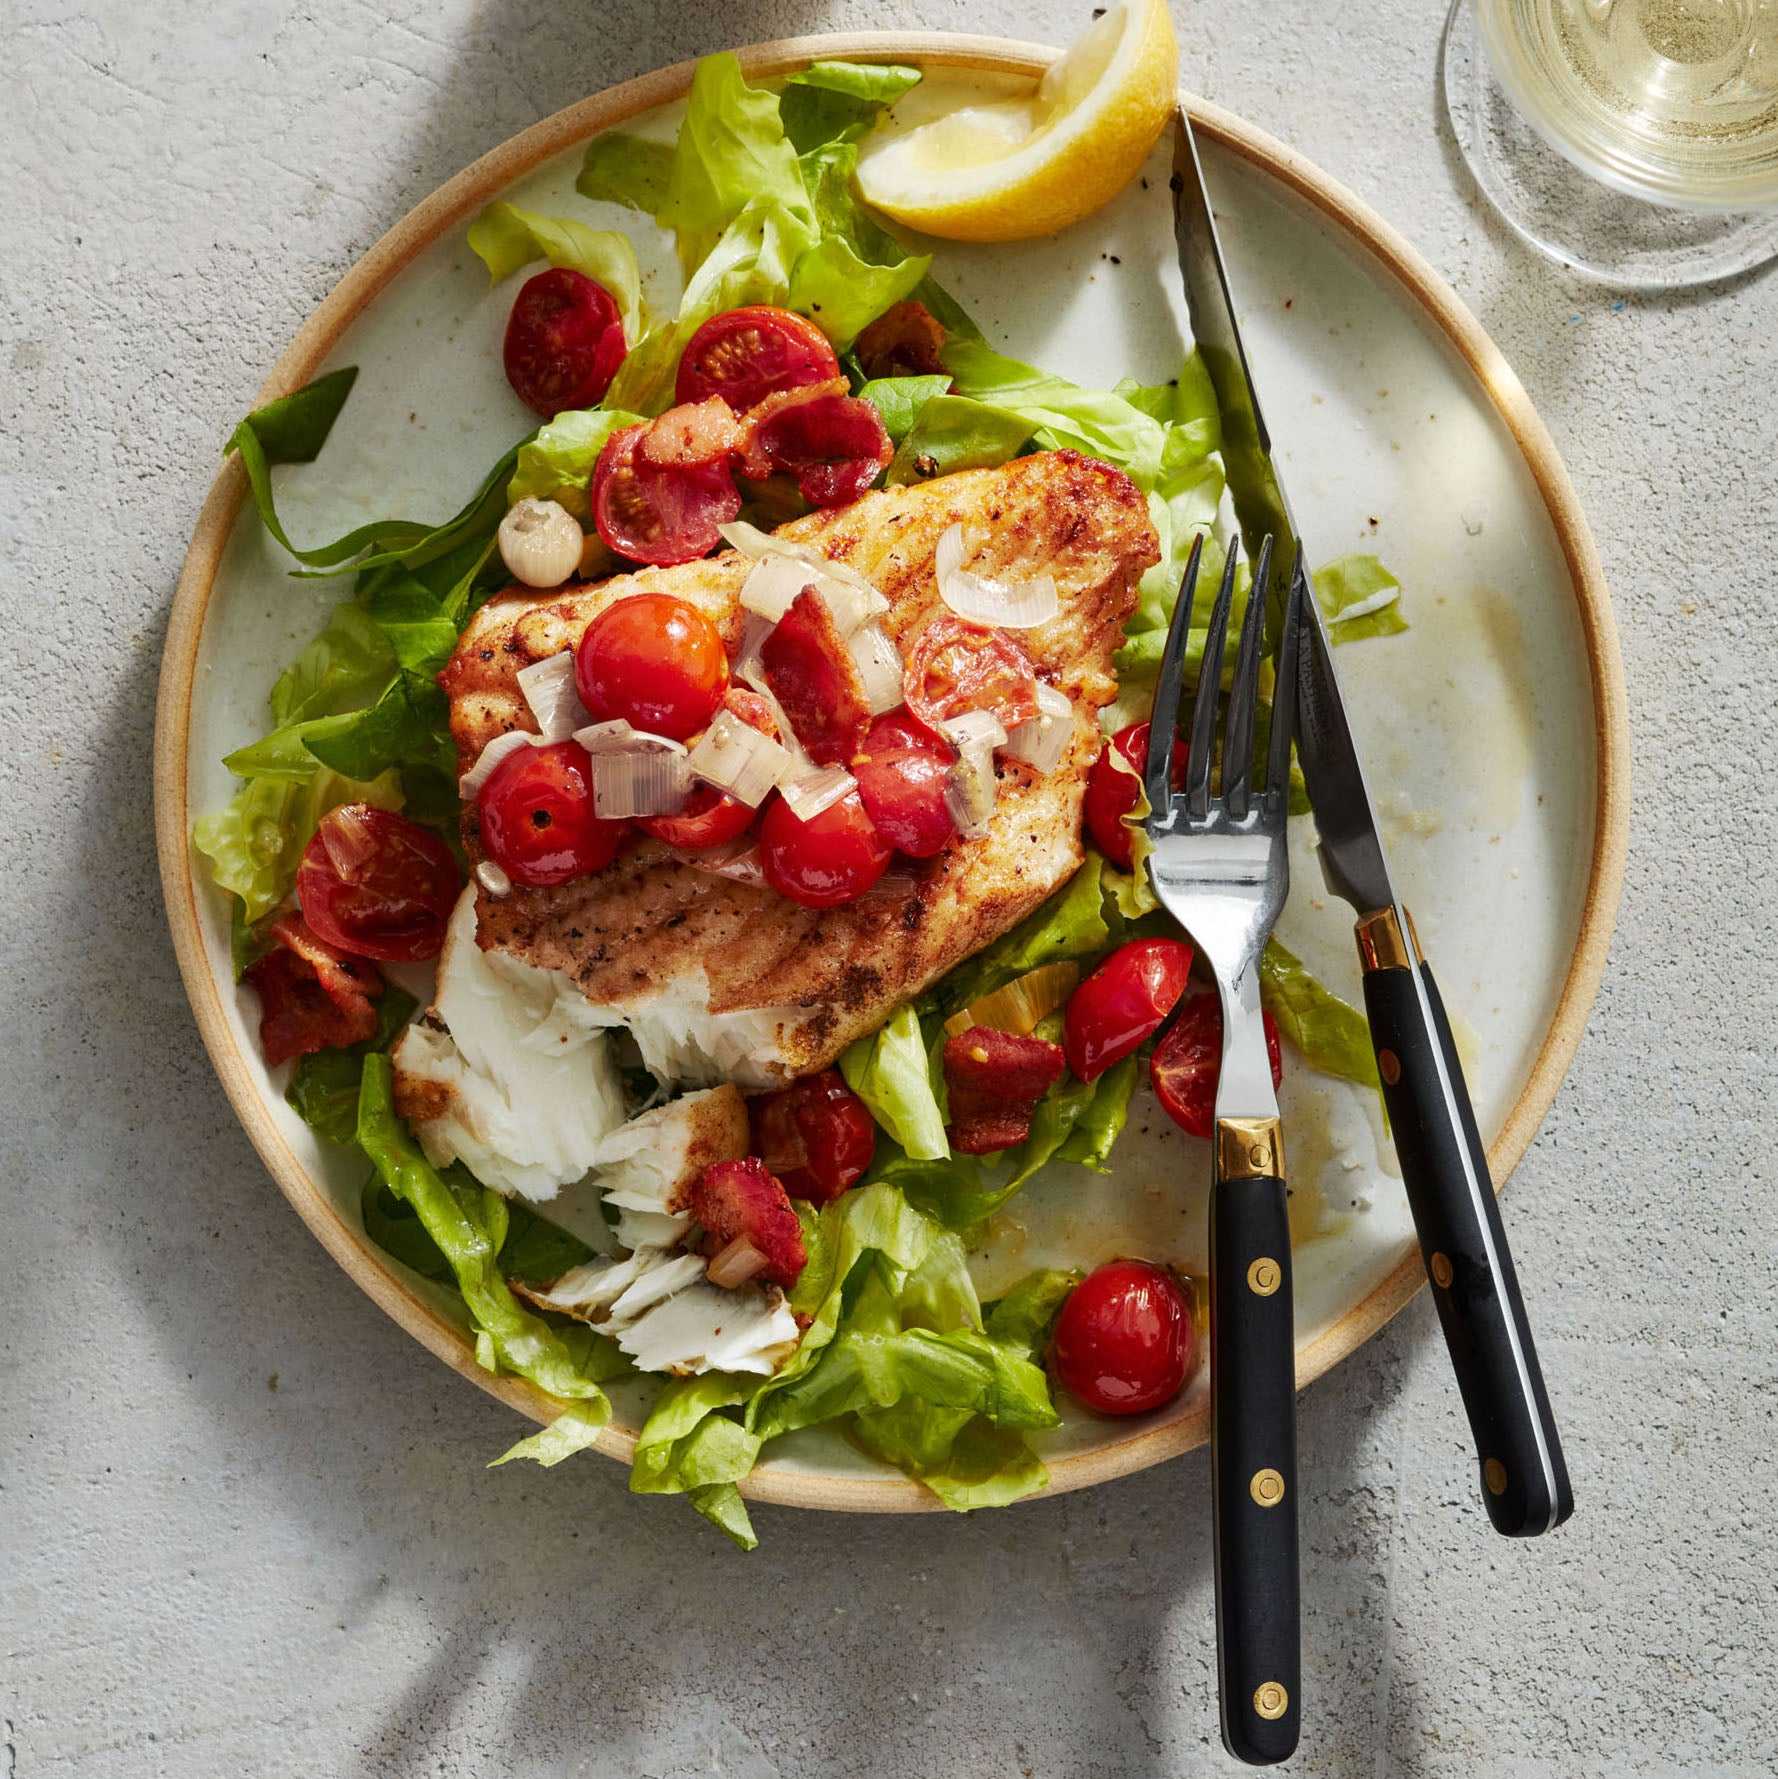 Rachael Ray's Halibut with Bacon, Lettuce & Tomatoes